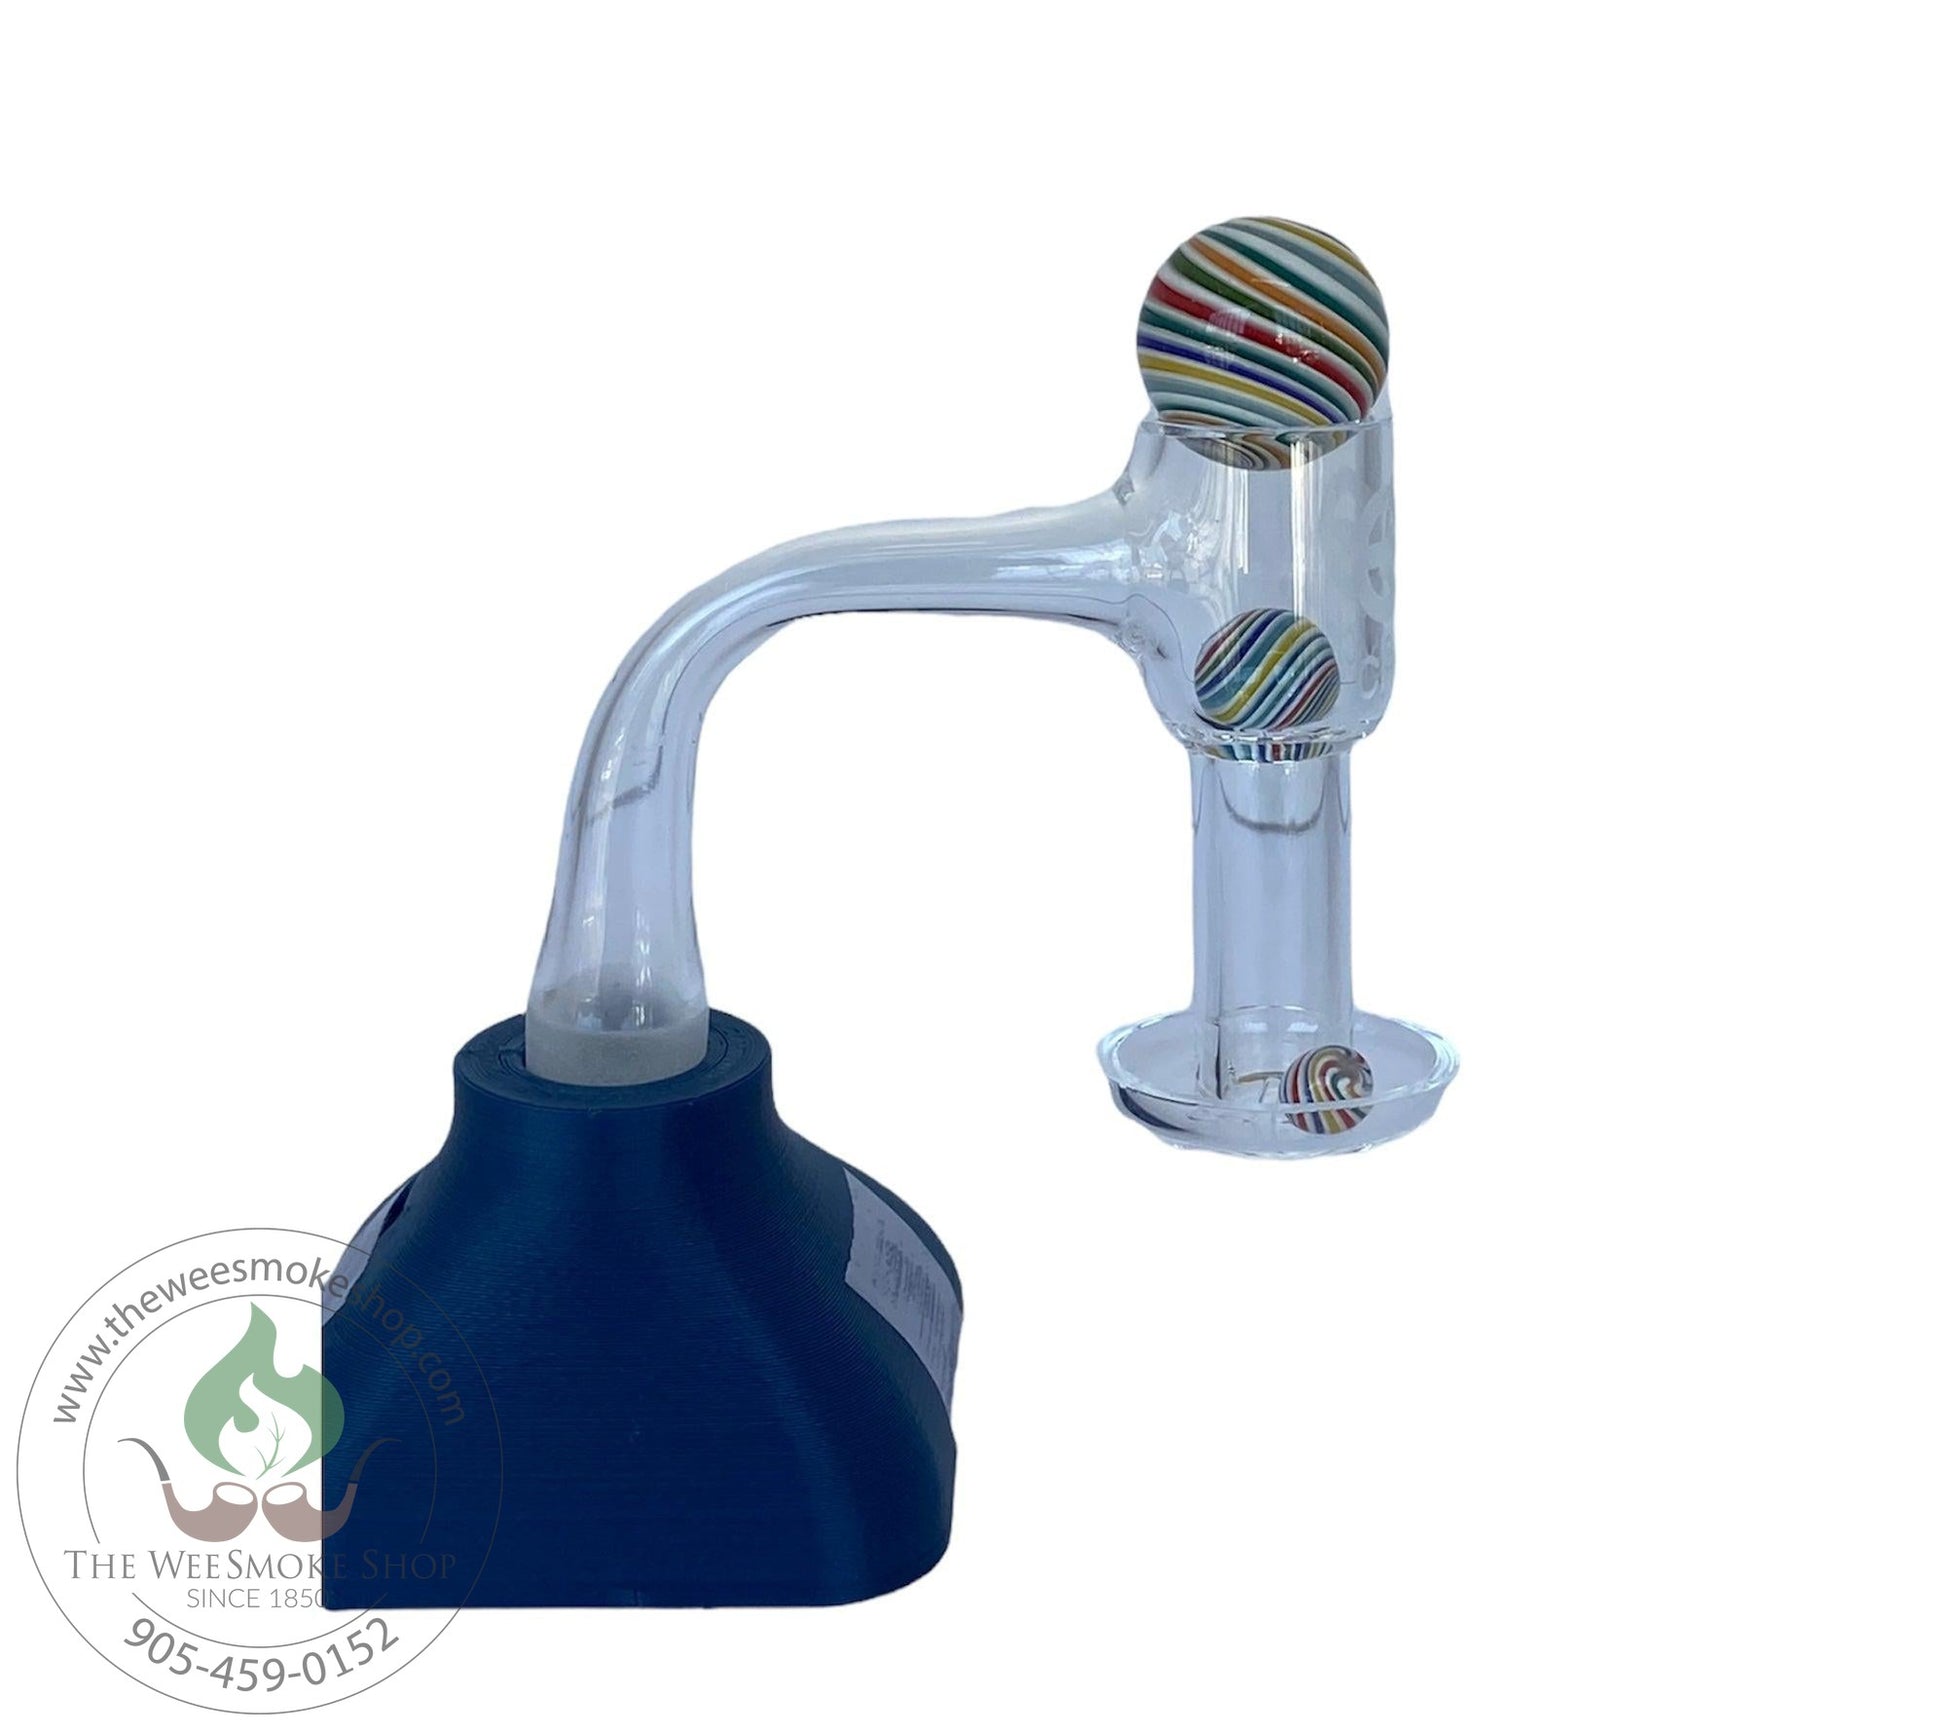 Cheech (14mm) 90 degree Banger with multi-colored Terp Beads - Wee Smoke Shop